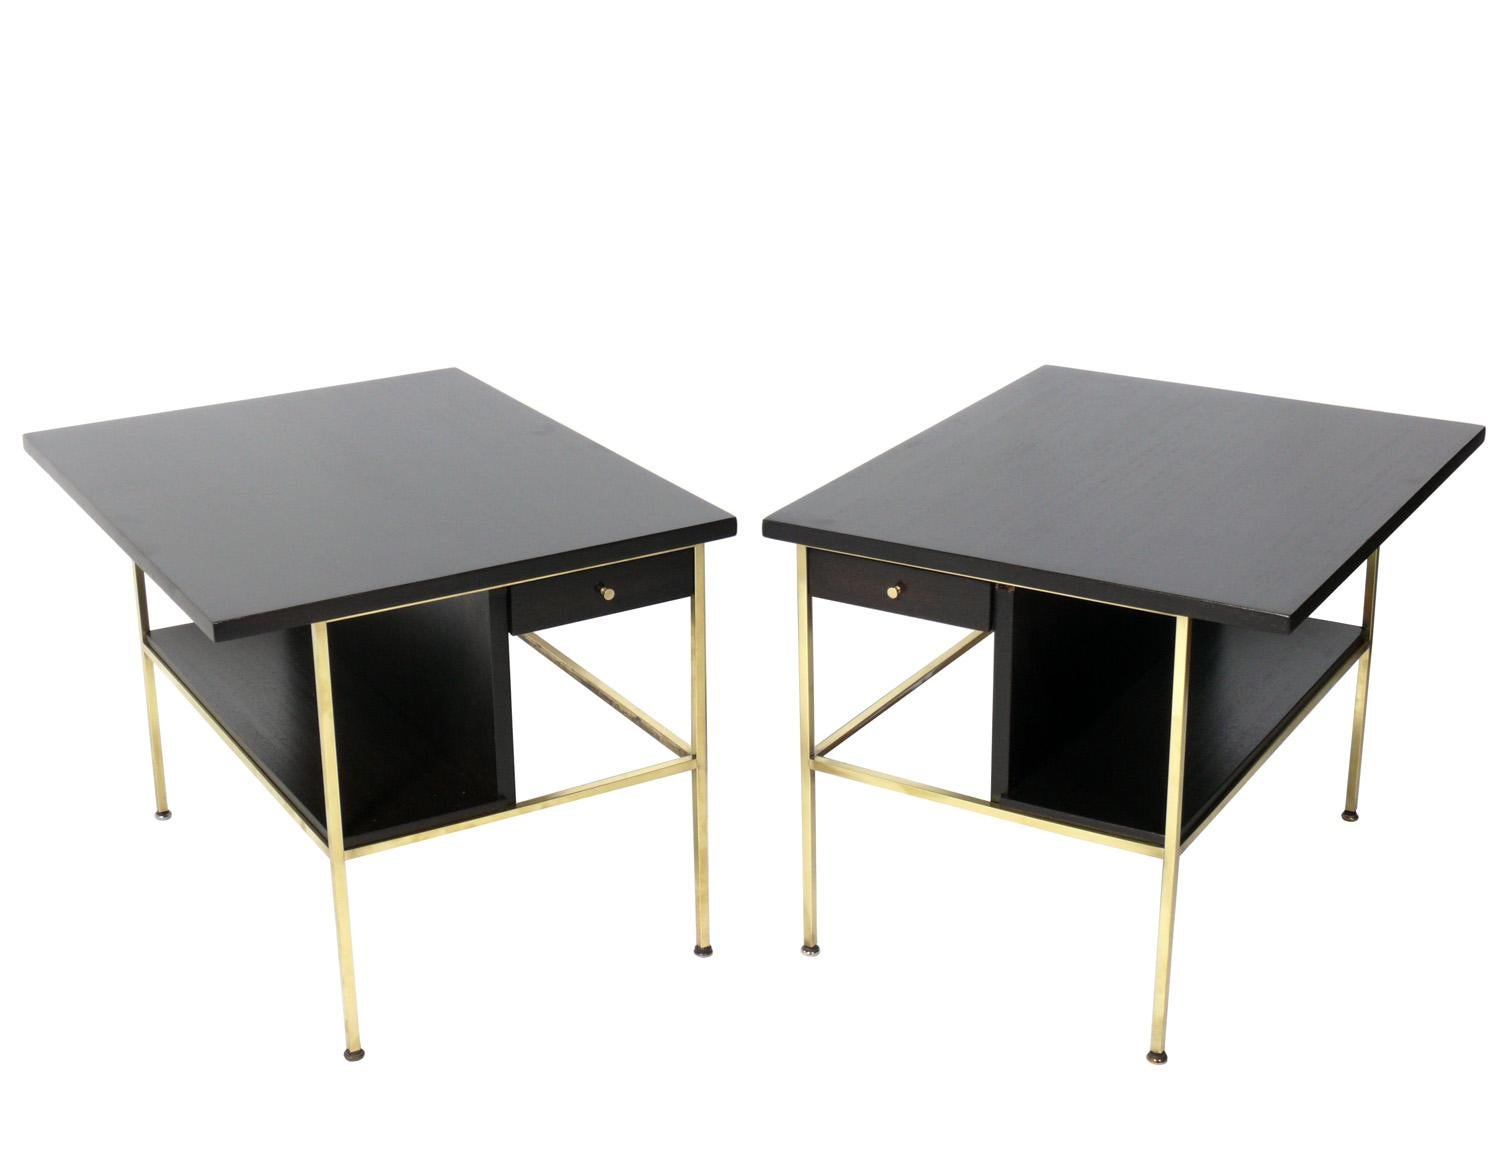 Mid-Century Modern side tables or nightstands, designed by Paul McCobb for Calvin, American, circa 1950s. Signed inside drawer. They have been completely restored in a deep brown color finish and the brass portions have been polished and lacquered.